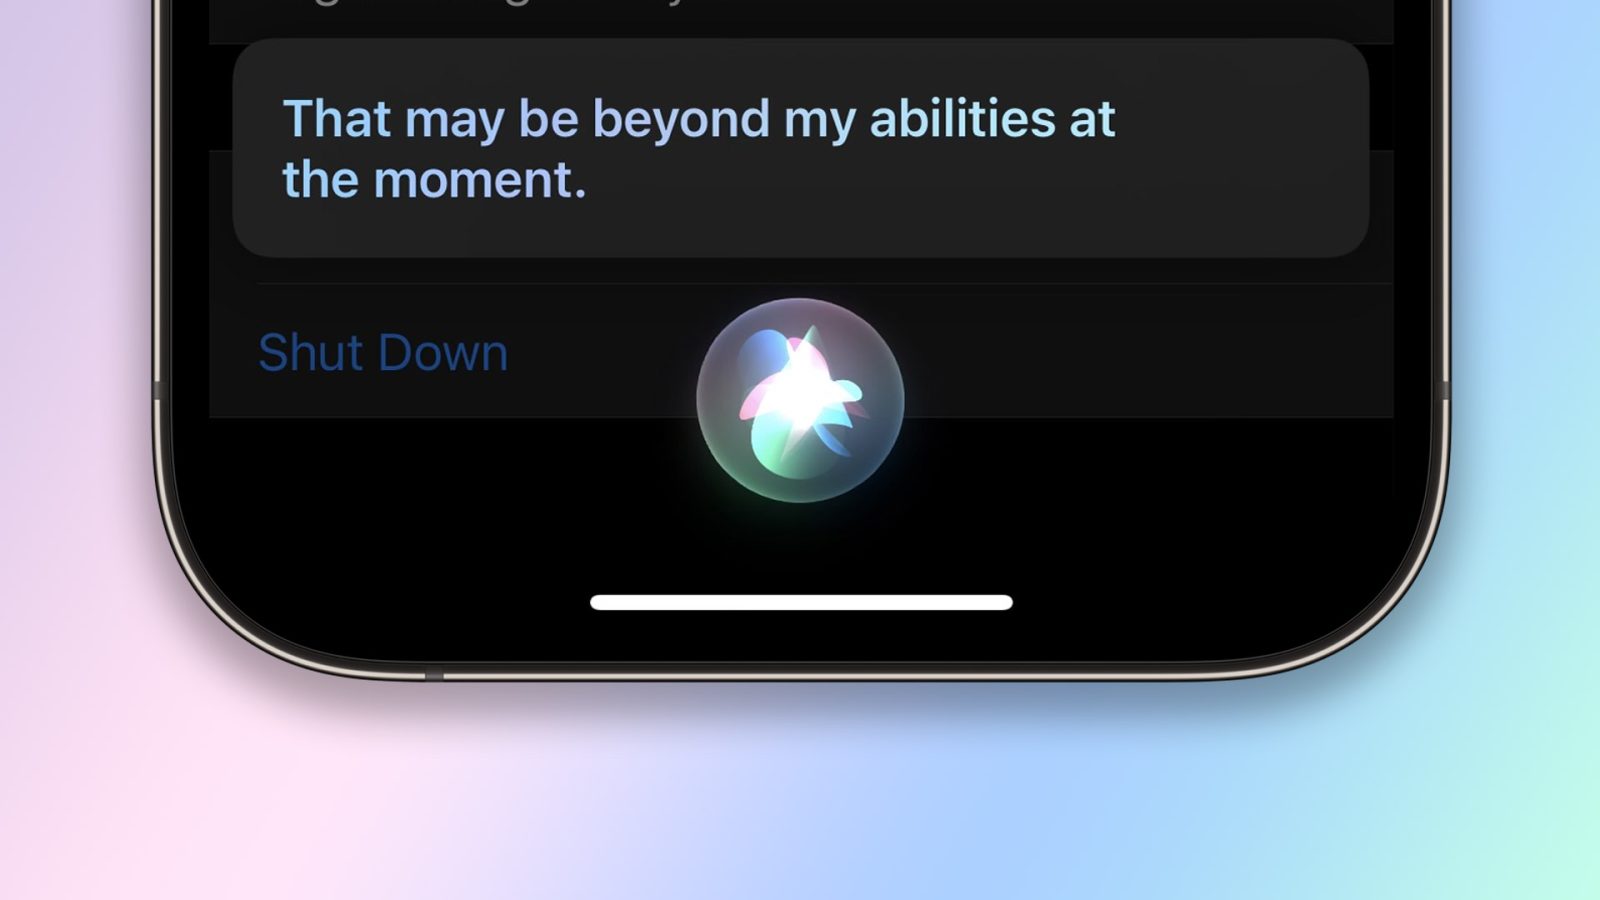 AI is changing how people interact with technology, and Apple is lagging behind with Siri